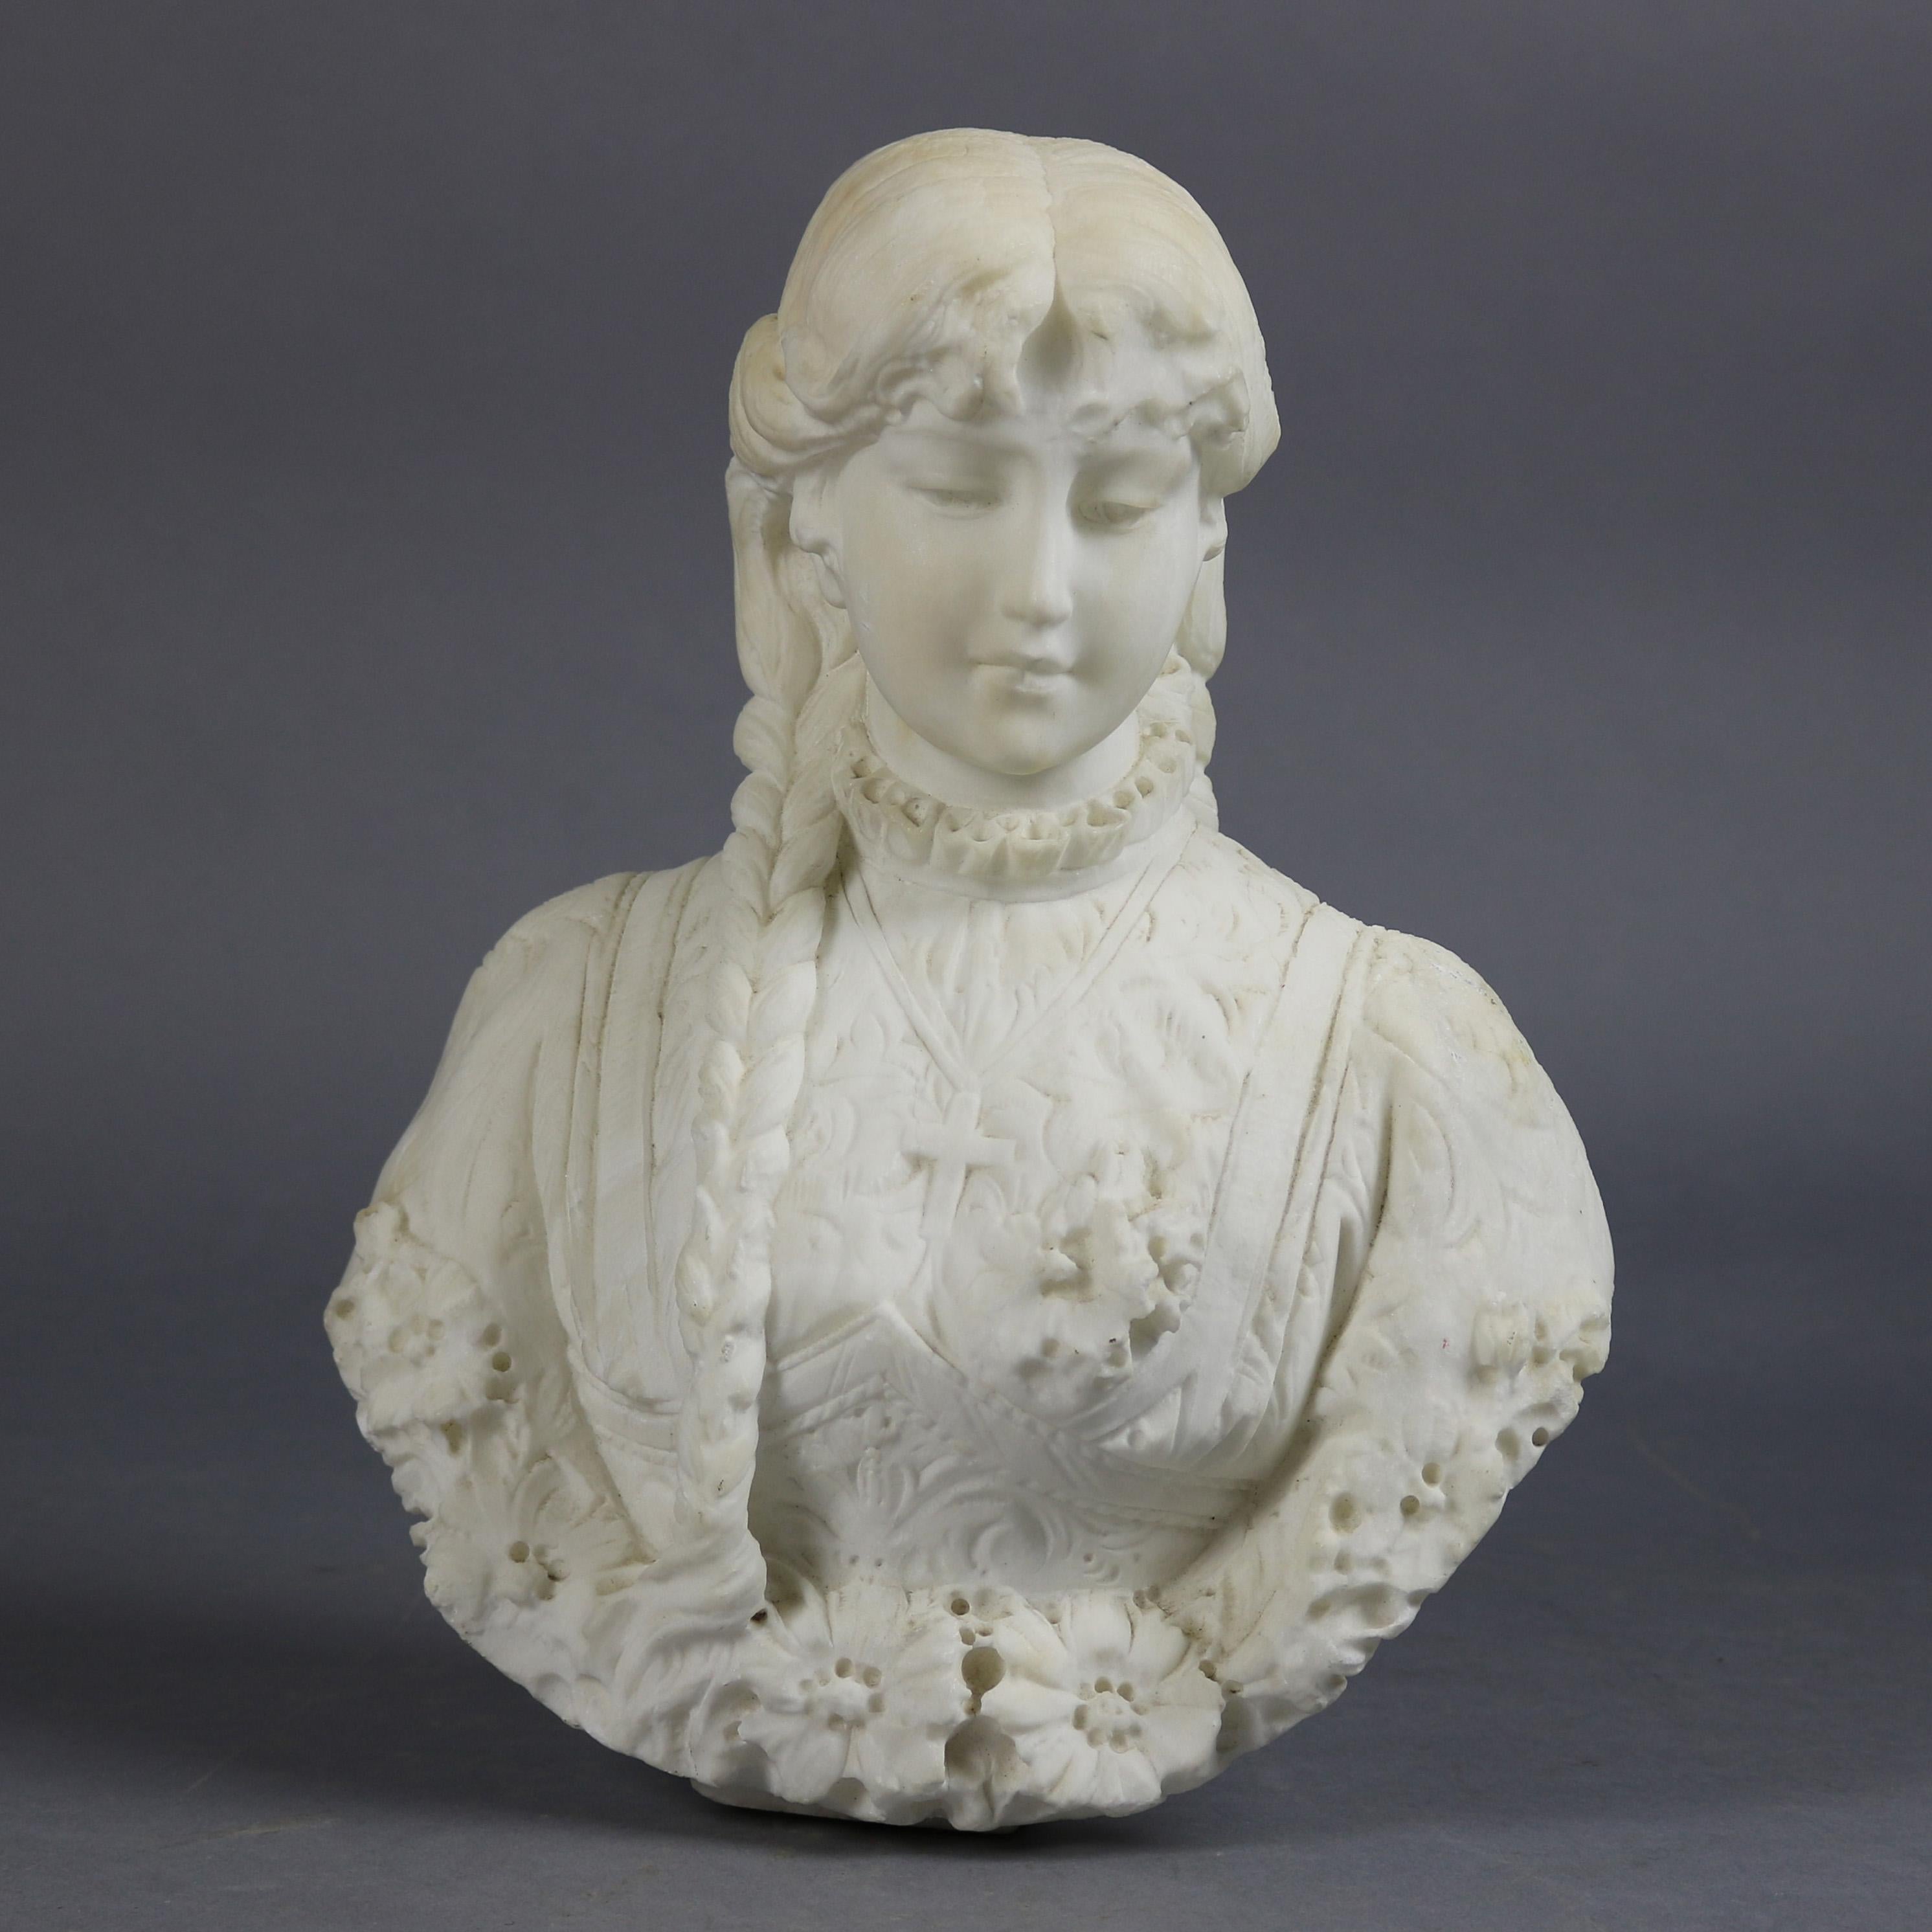 An Italian Classical portrait sculpture features highly detailed carved alabaster bust of a young woman with long braids and a crucifix bordered in floral accents, circa 1890

Measures - 12.5